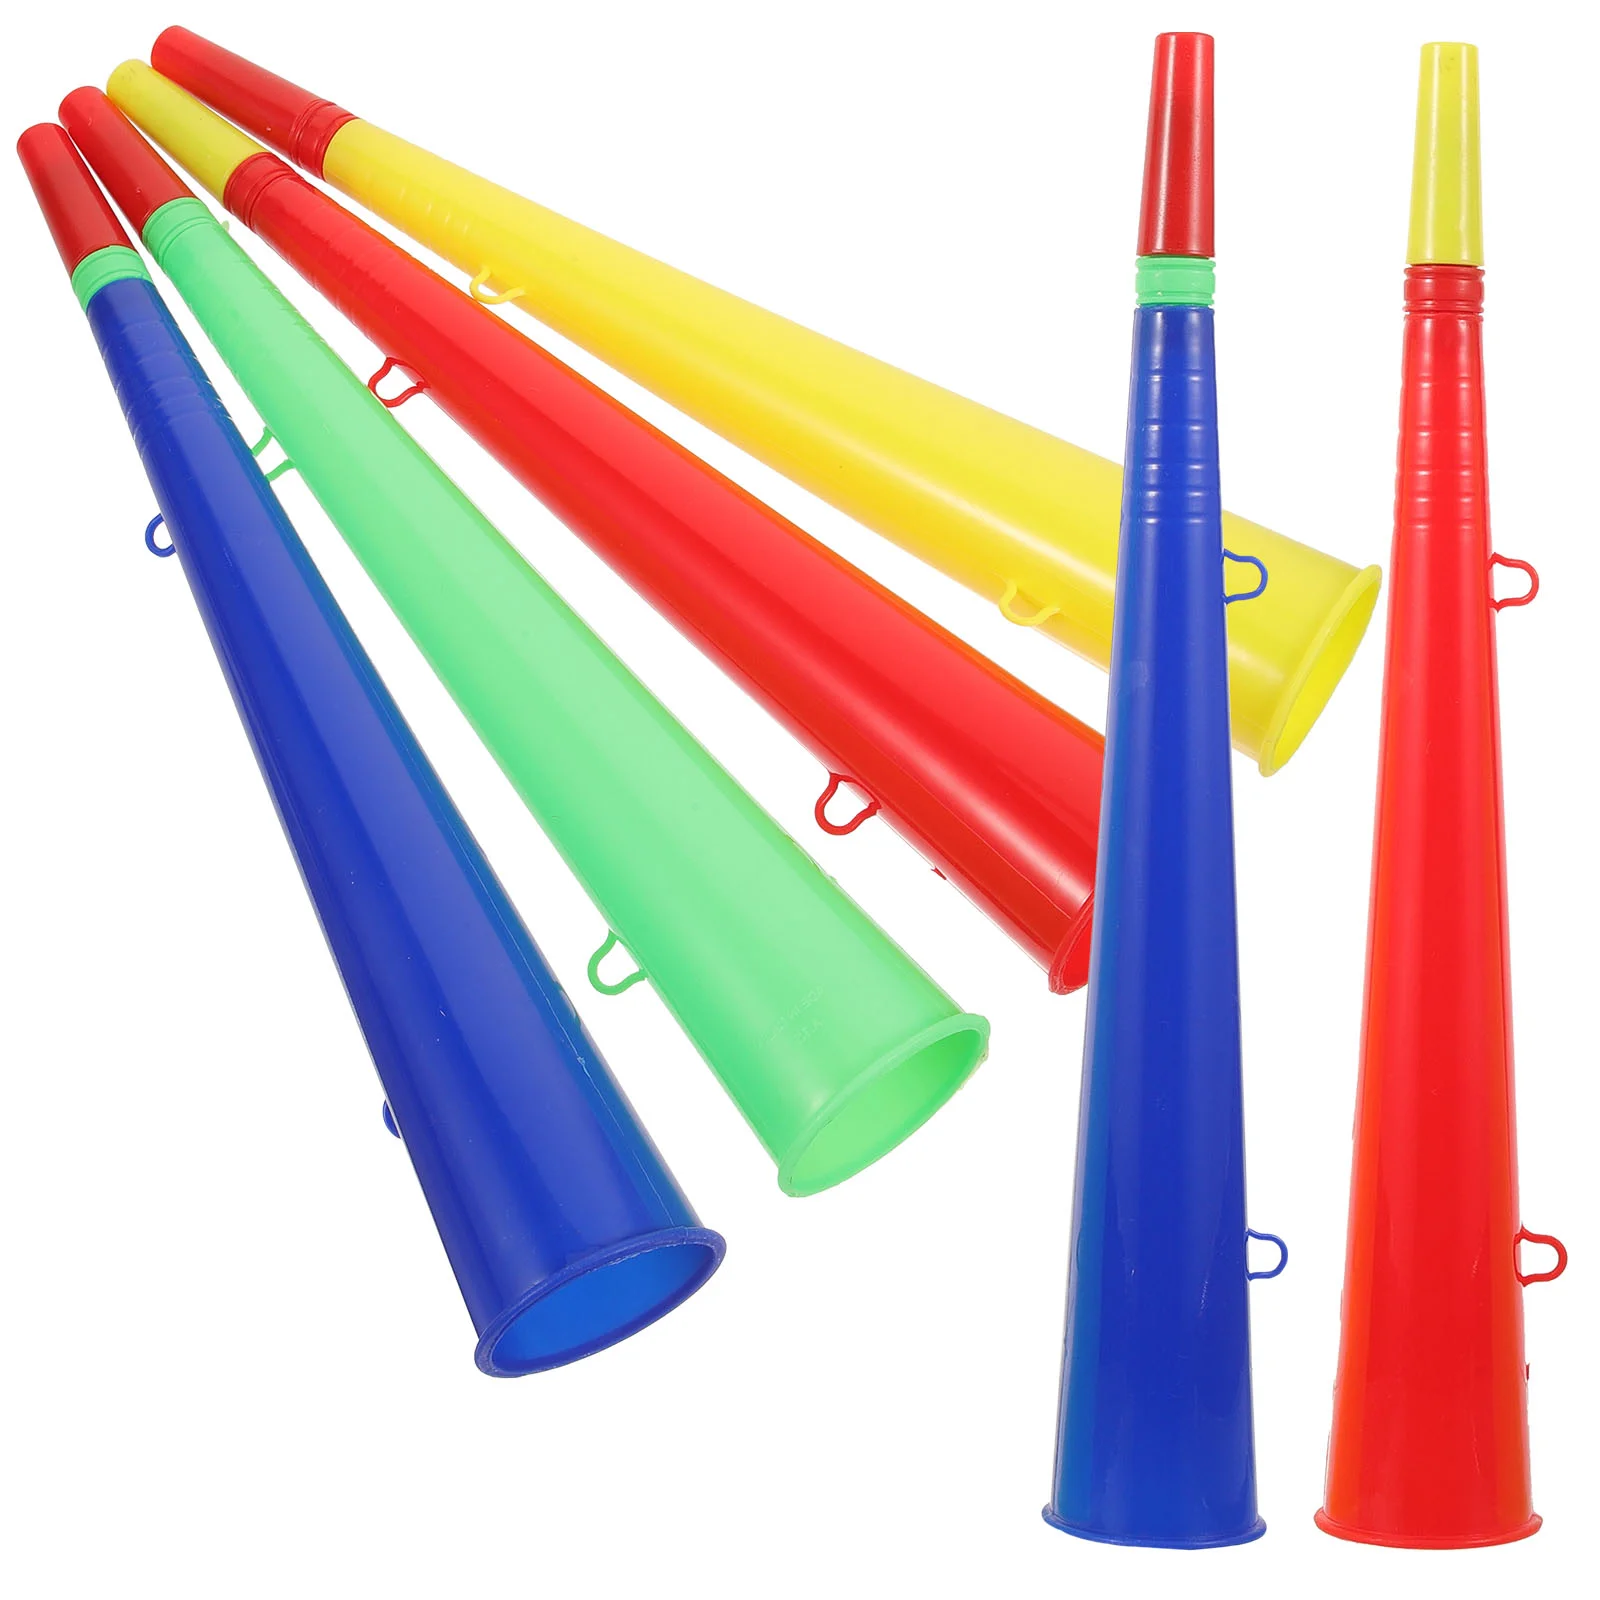 

6 PCS Toy for Kids Sports Game Trumpet Fans Small Kidtraxtoys Bright Color Horn Children's